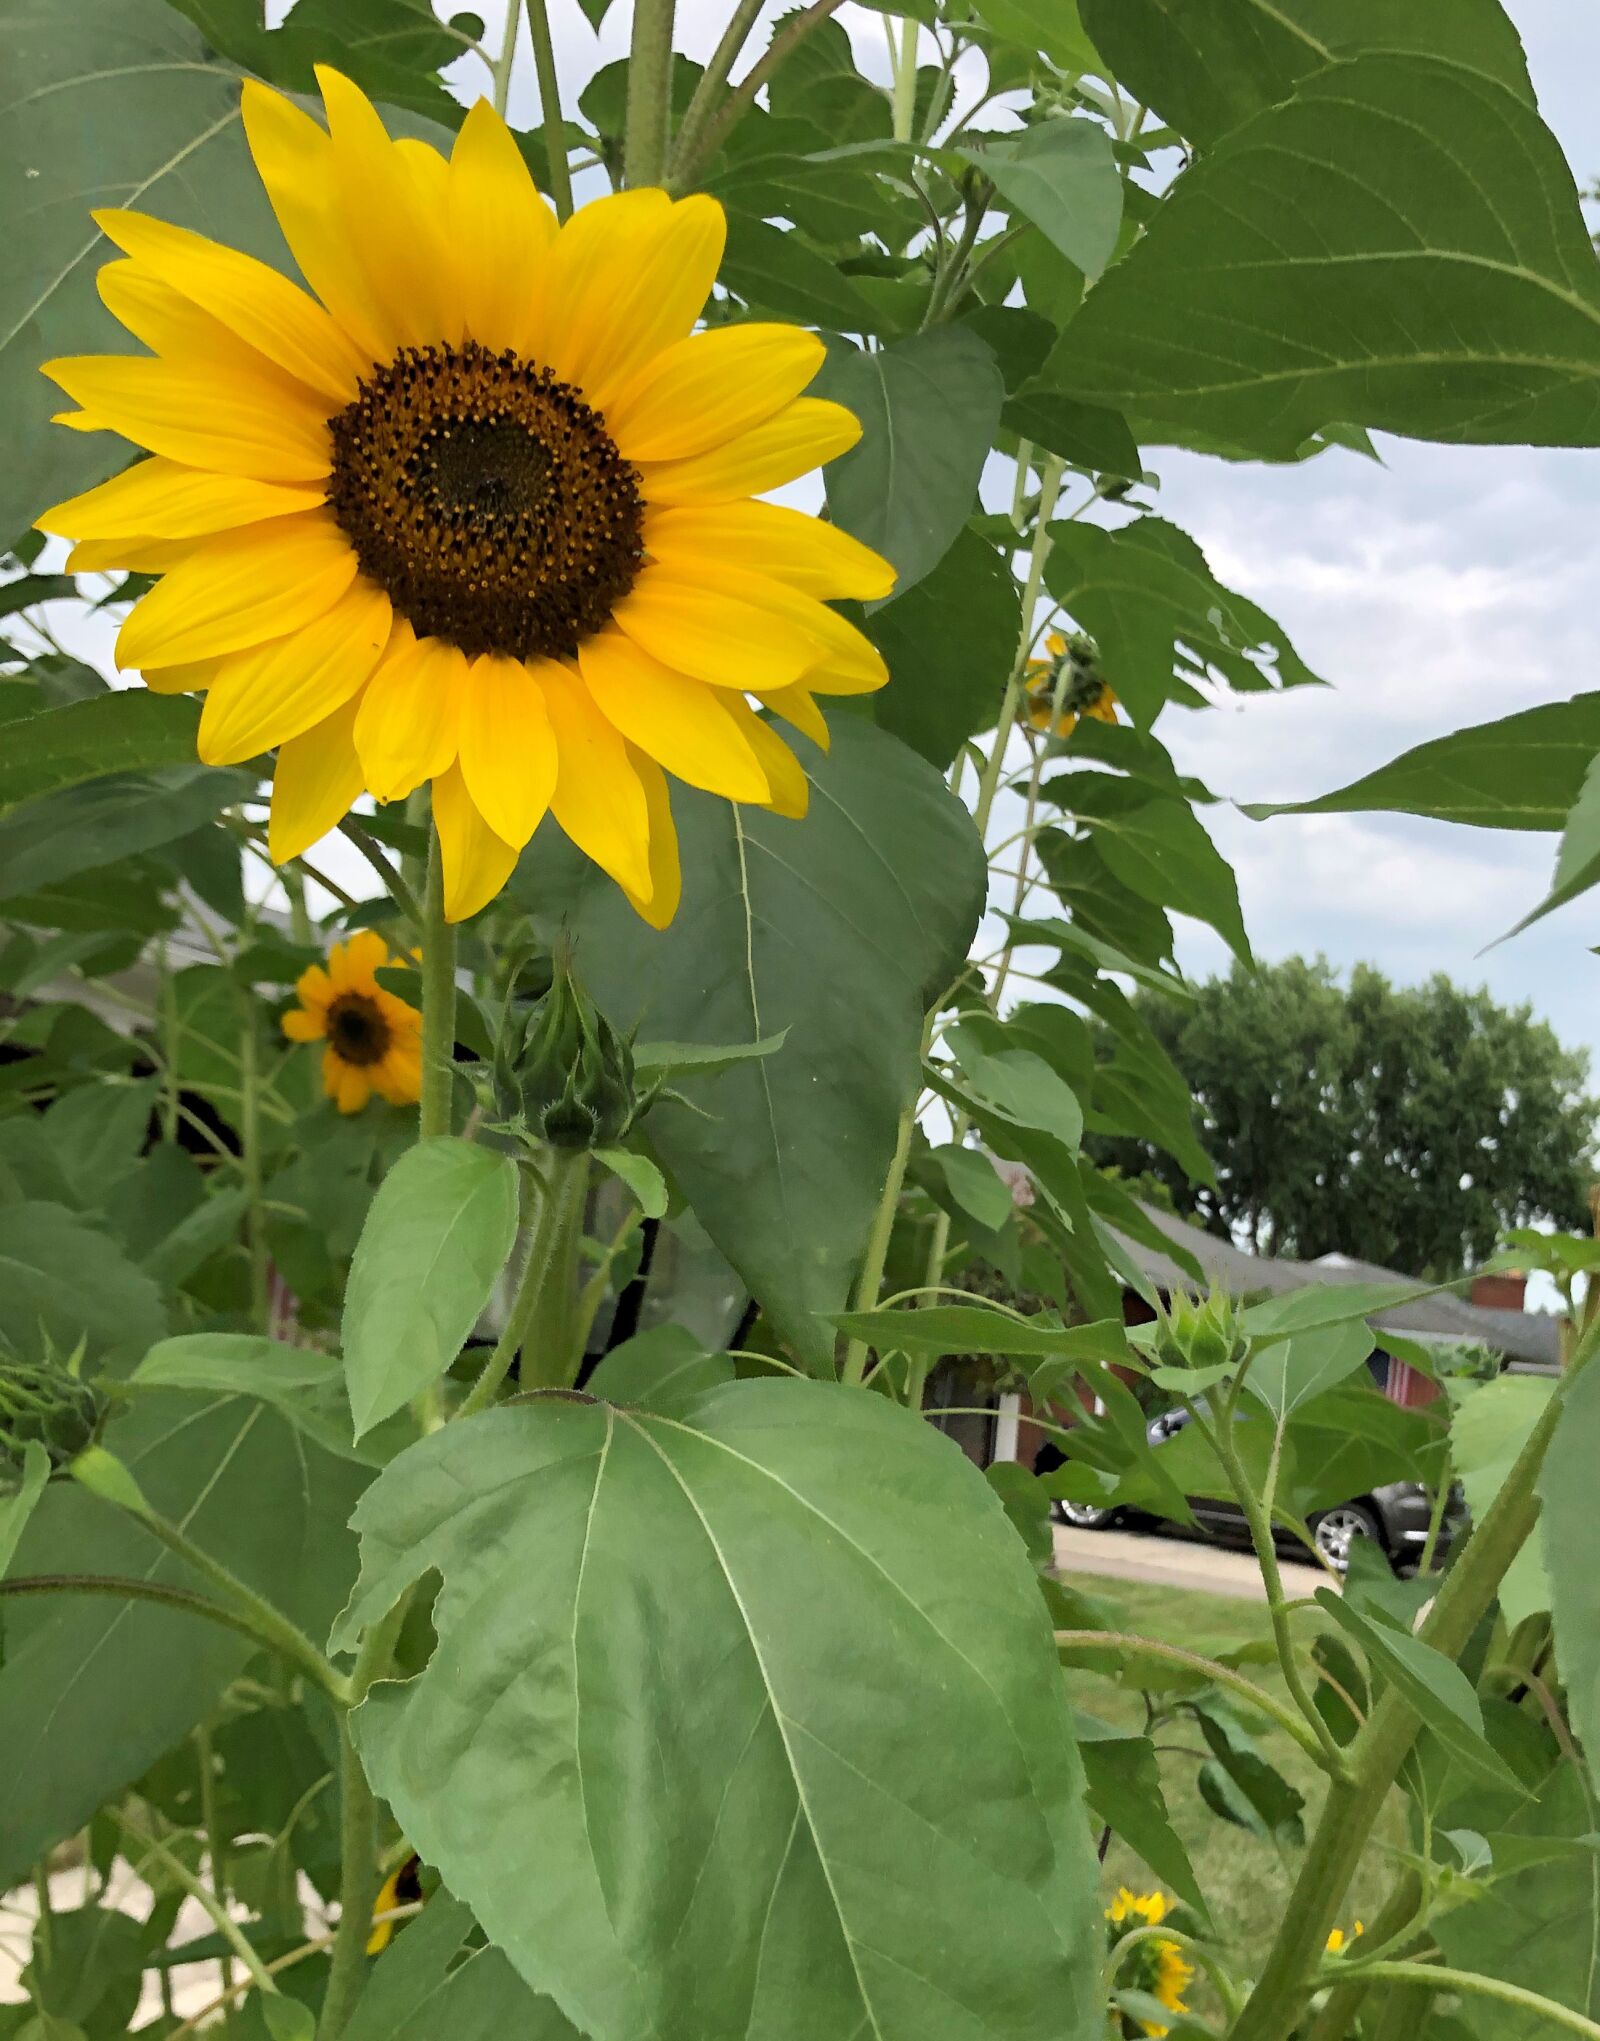 Apple iPhone 8 + iPhone 8 back camera 3.99mm f/1.8 sample photo. Sunflower, summer, happy photography